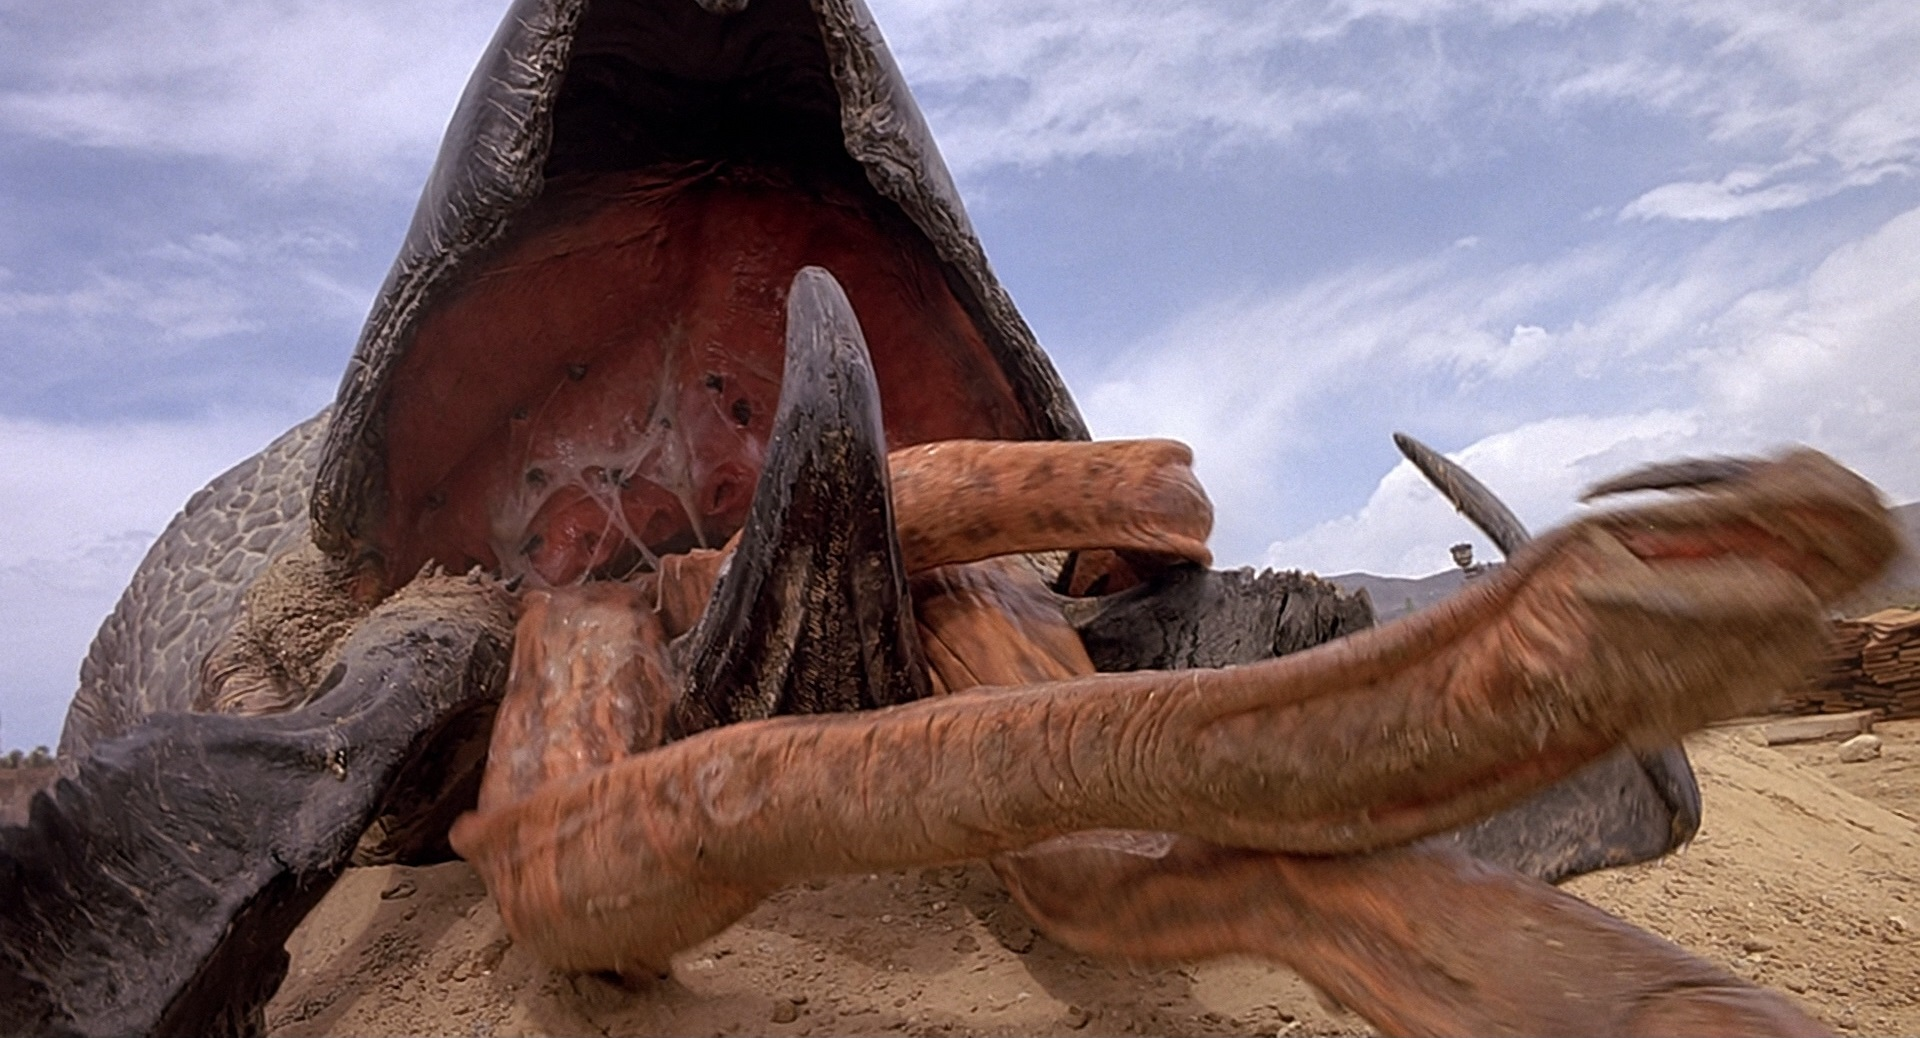 In the popular 1990 creature feature Tremors, the creature in question was a large underground worm called a Graboid.